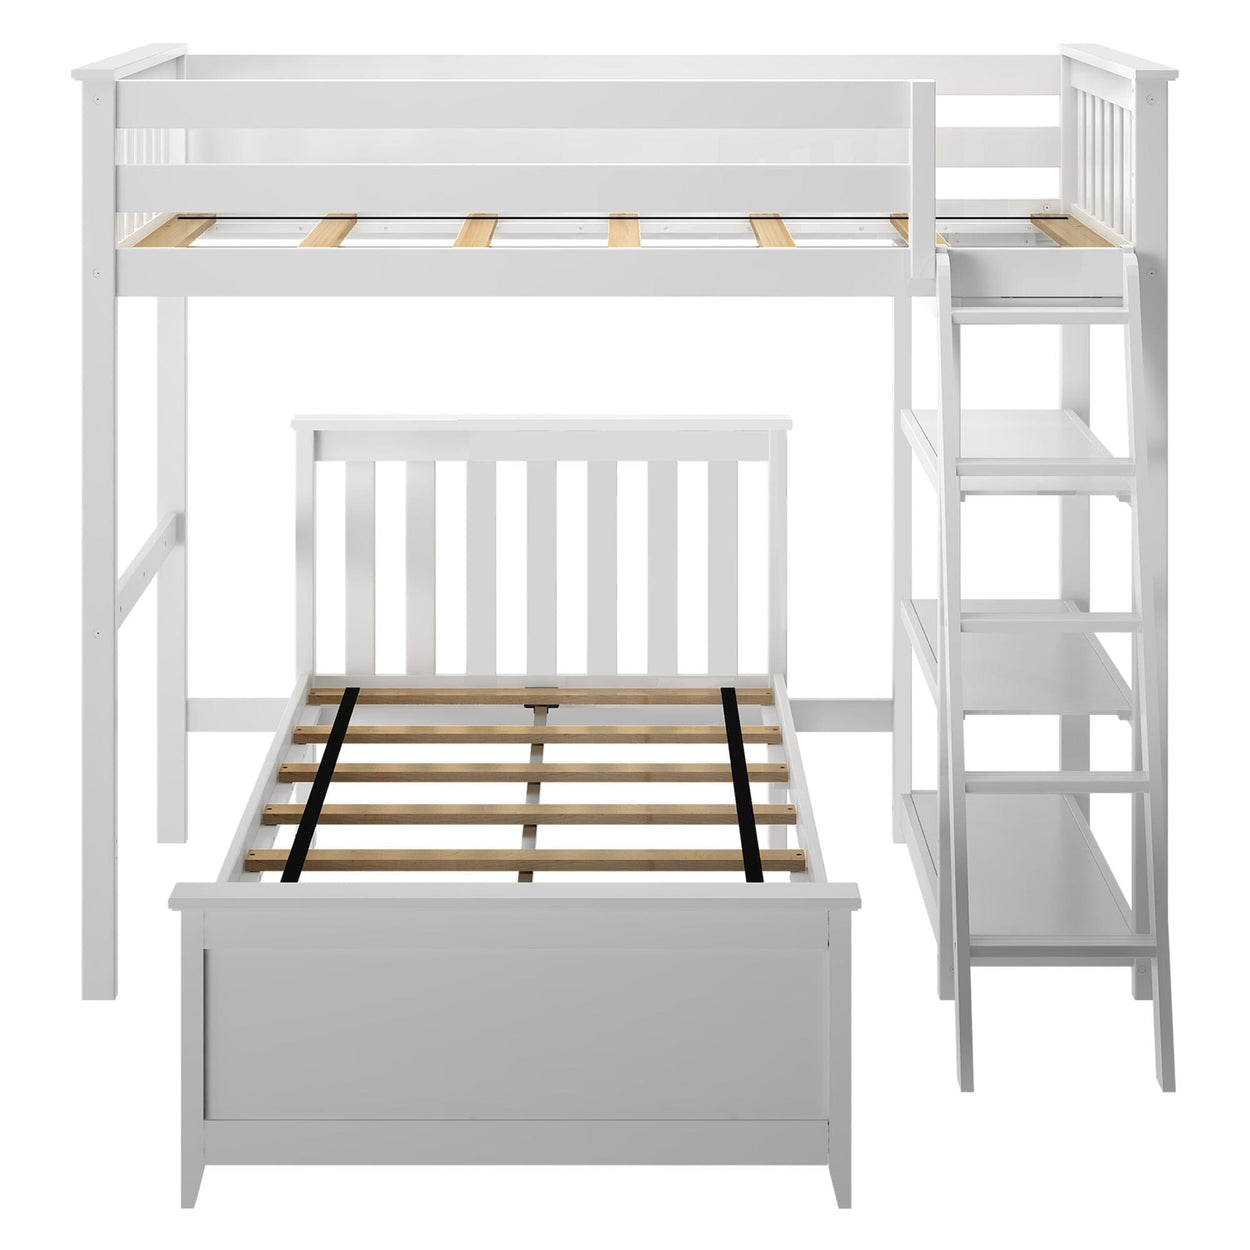 18-911-002 : Bunk Beds L-Shaped Twin over Twin Bunk Bed with Bookcase, White